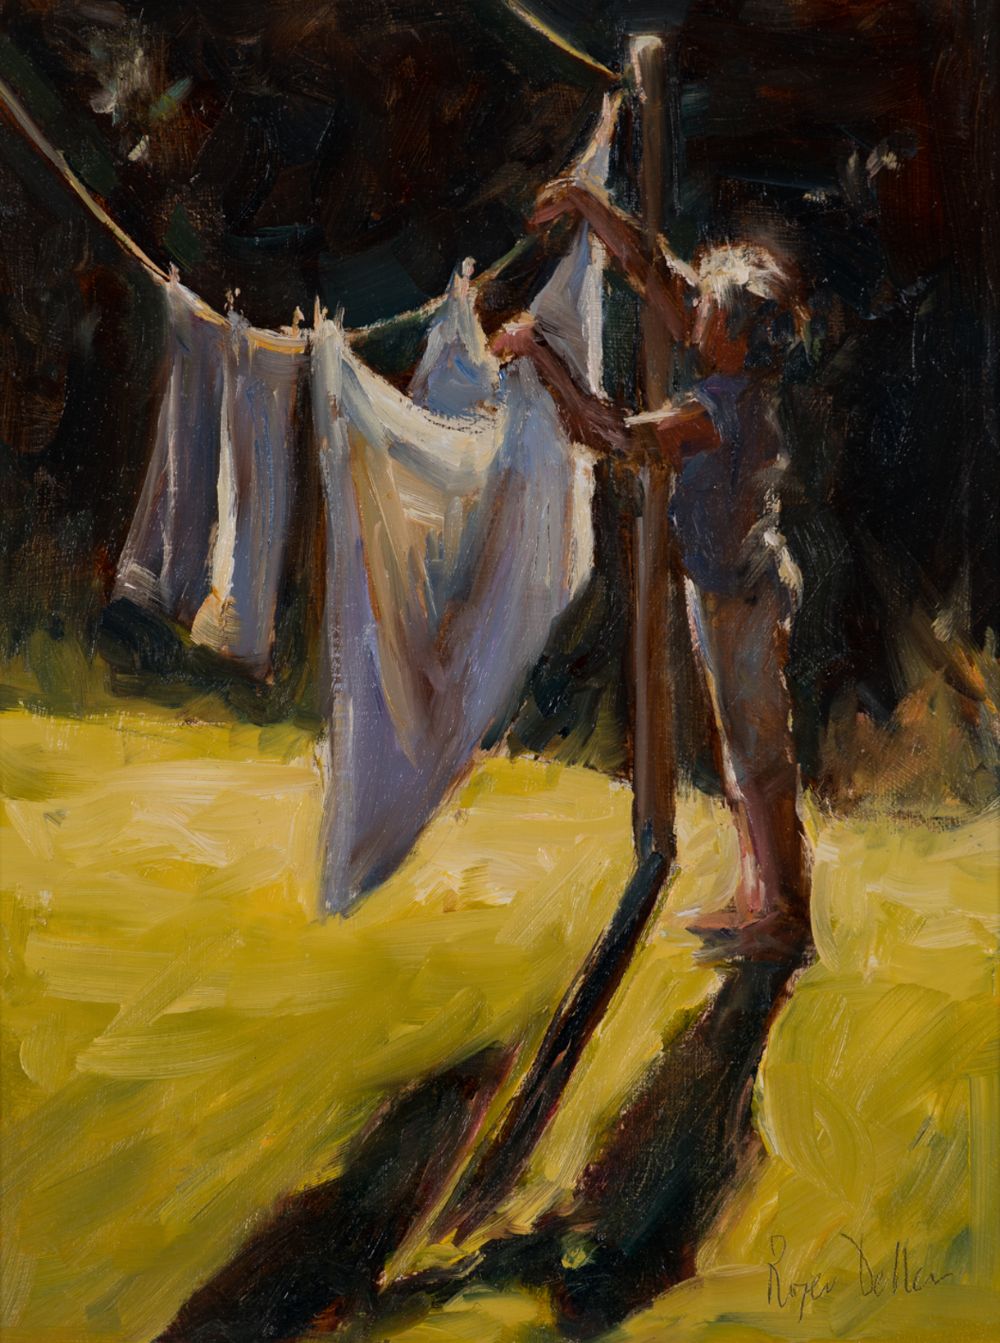 THE WASHING LINE by Roger Dellar ROI at Dolan's Art Auction House